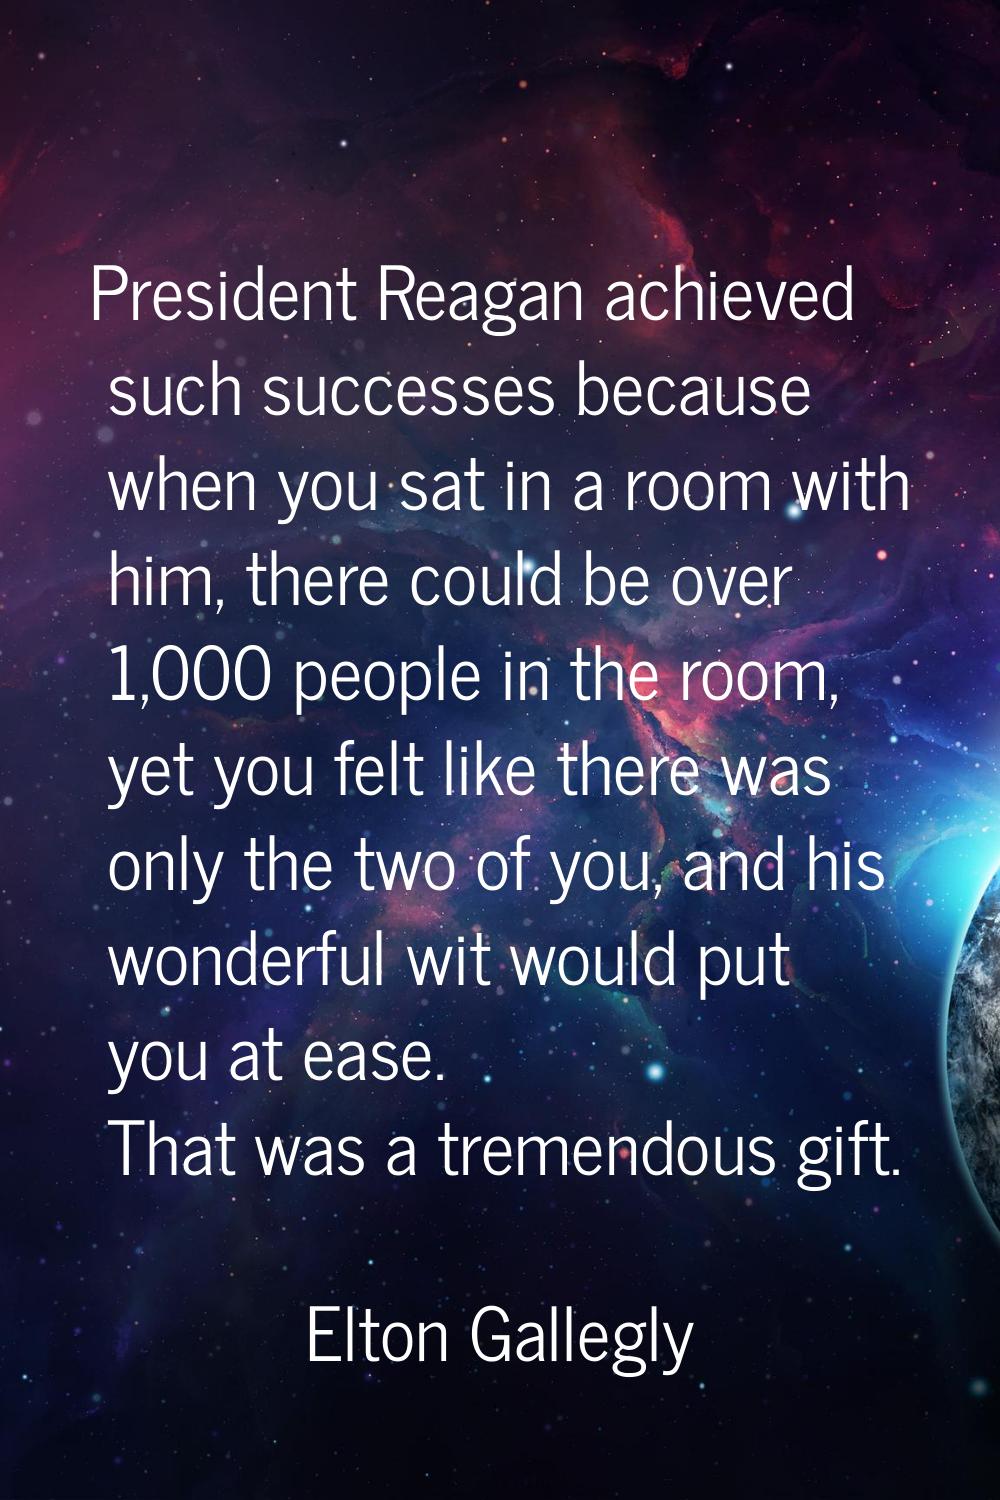 President Reagan achieved such successes because when you sat in a room with him, there could be ov